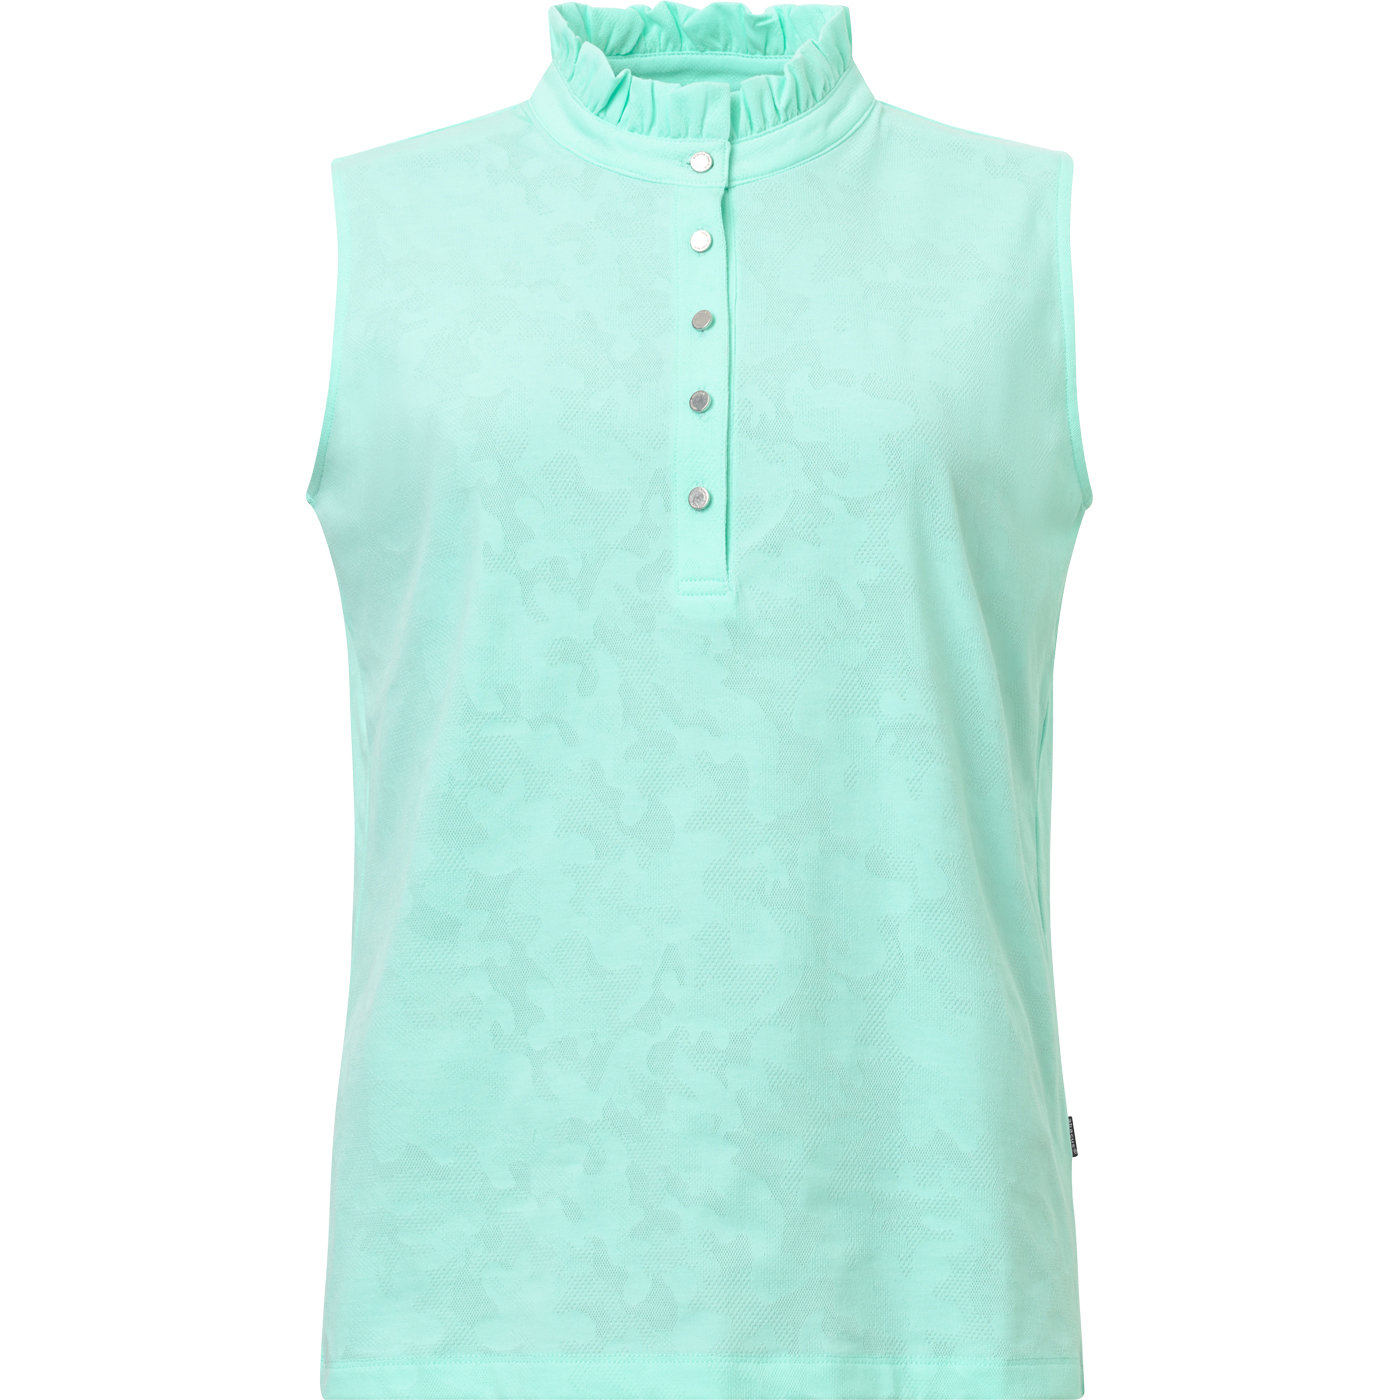 Lds Mauna sleeveless - breeze in the group WOMEN / All clothing at Abacus Sportswear (2764343)